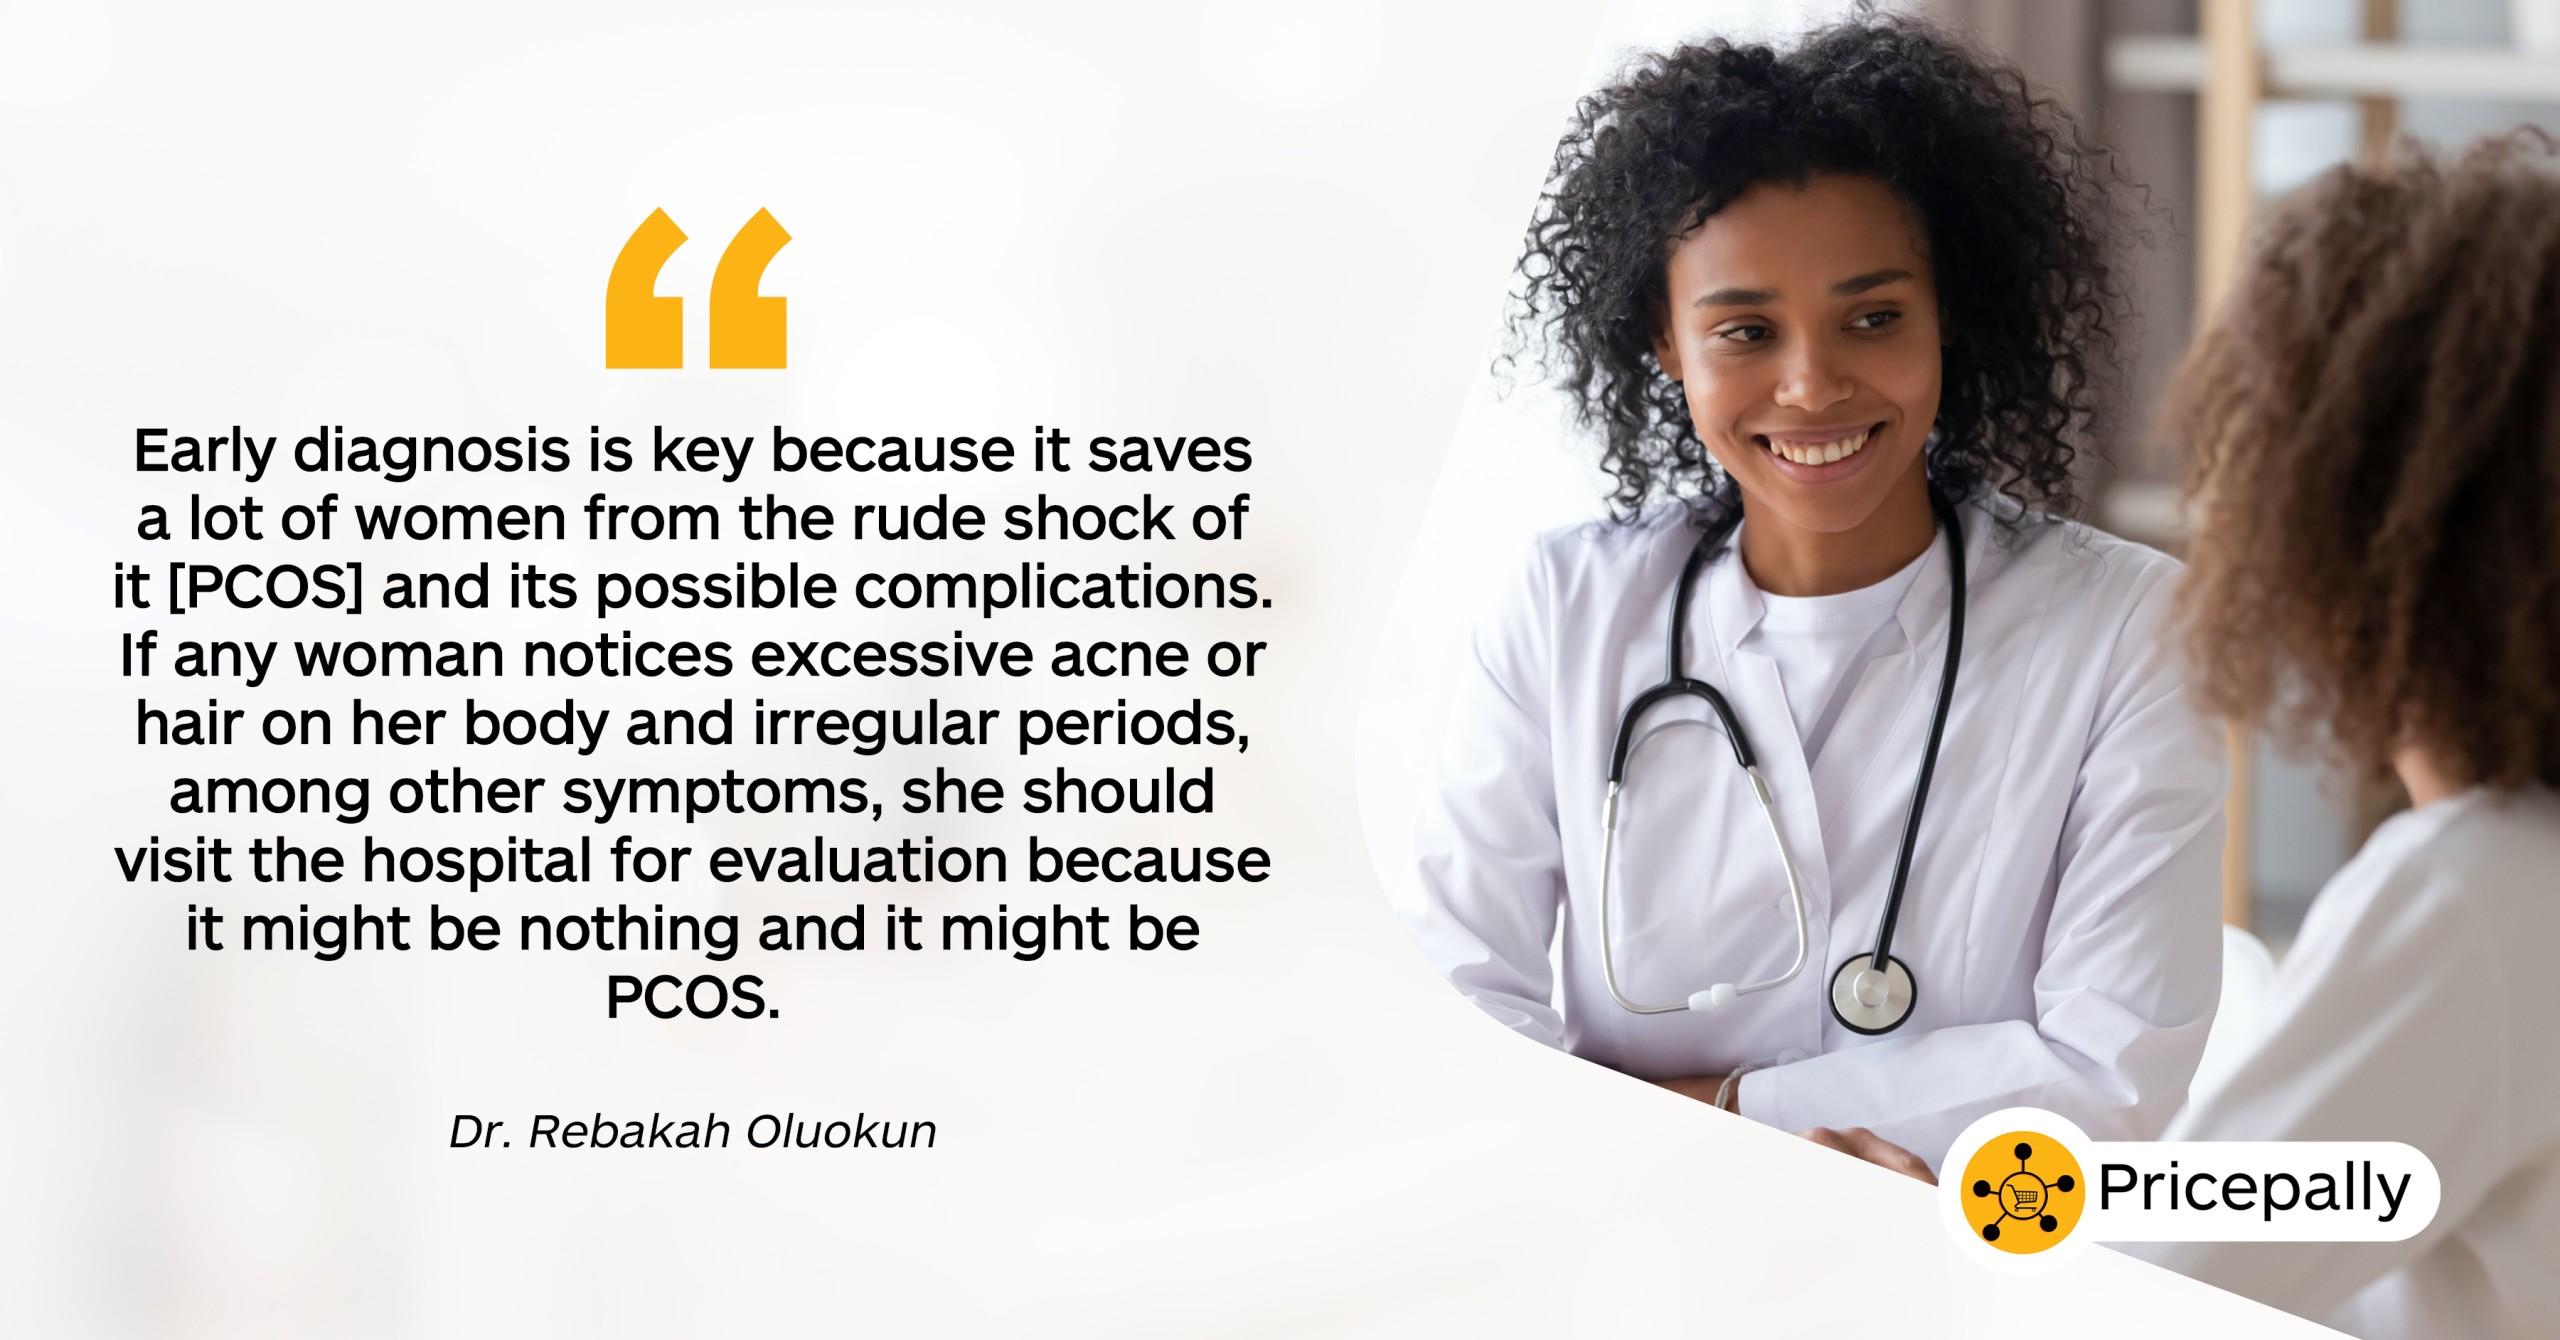 Dr. Rebekah Oluokun explains the importance of early diagnosis in PCOS management. 